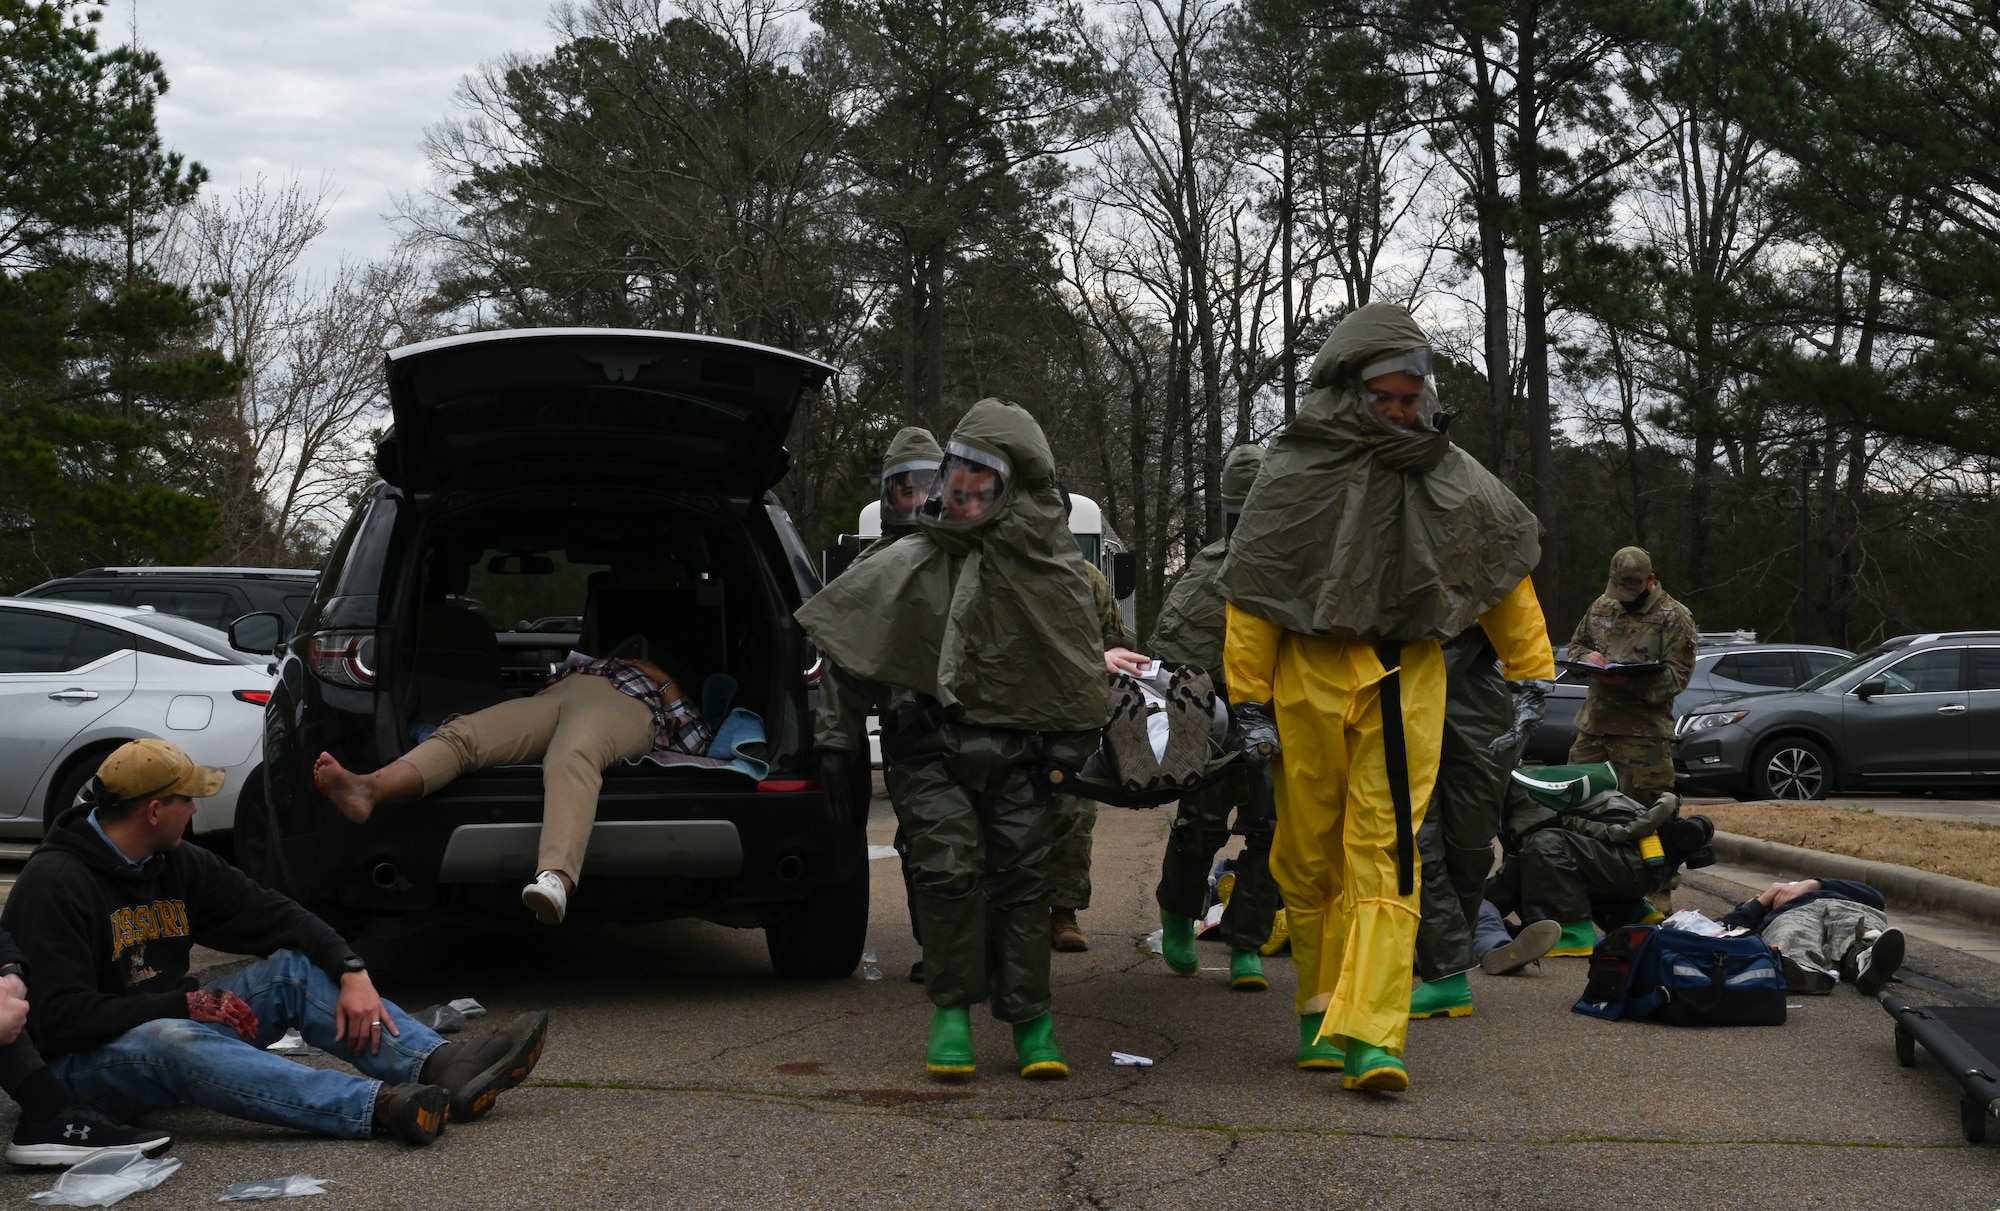 Medics from the 14th Medical Group at Columbus Air Force Base, Miss., carry a volunteer on a stretcher at an exercise on March 11, 2022. While decontaminating and isolating patients, medics are required to wear CBRNE protective gear. (U.S. Air Force photo by Airman 1st Class Jessica Haynie)